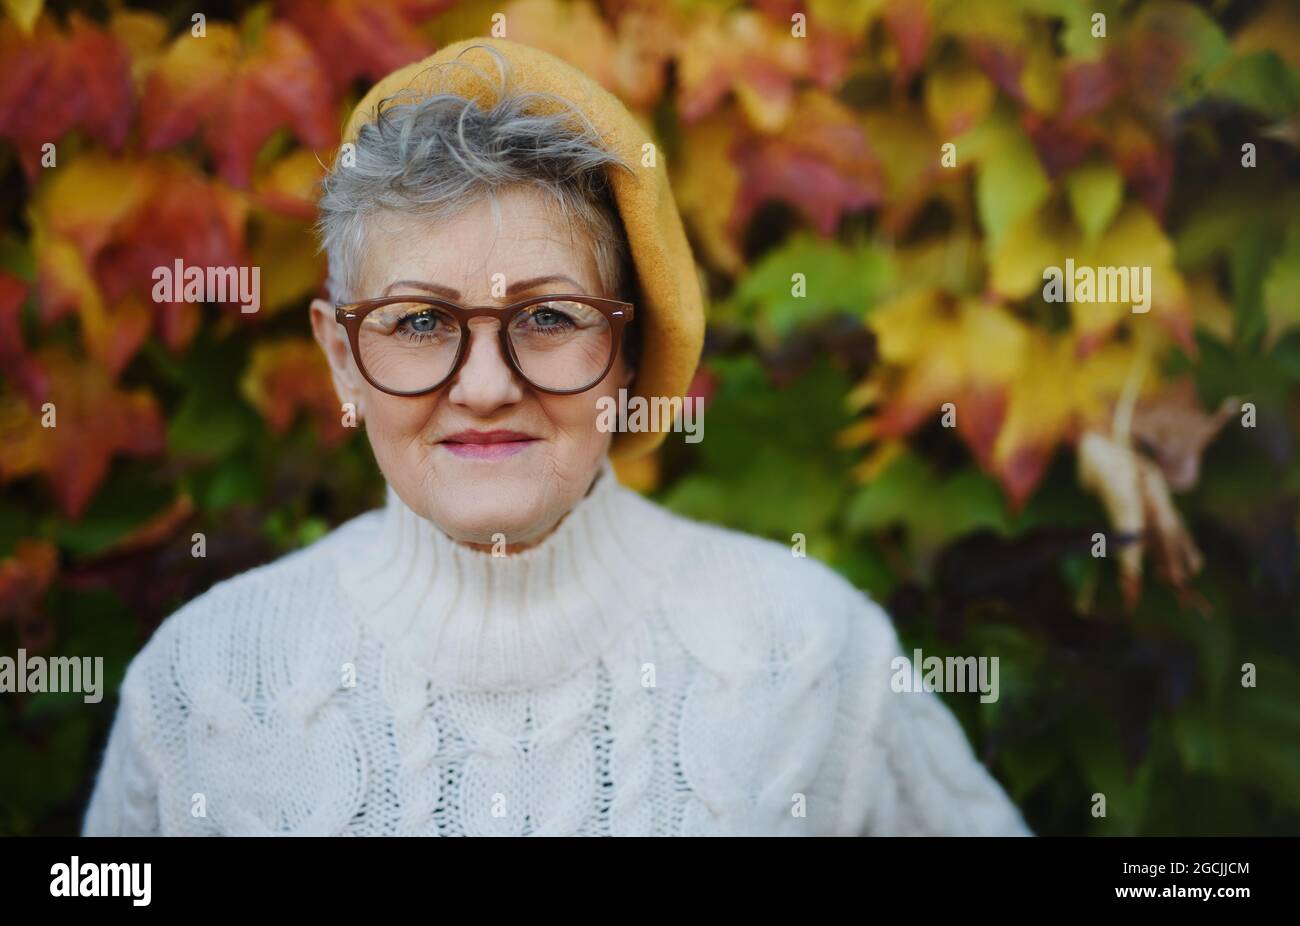 Senior woman standing outdoors against colorful natural autumn background, looking at camera. Stock Photo